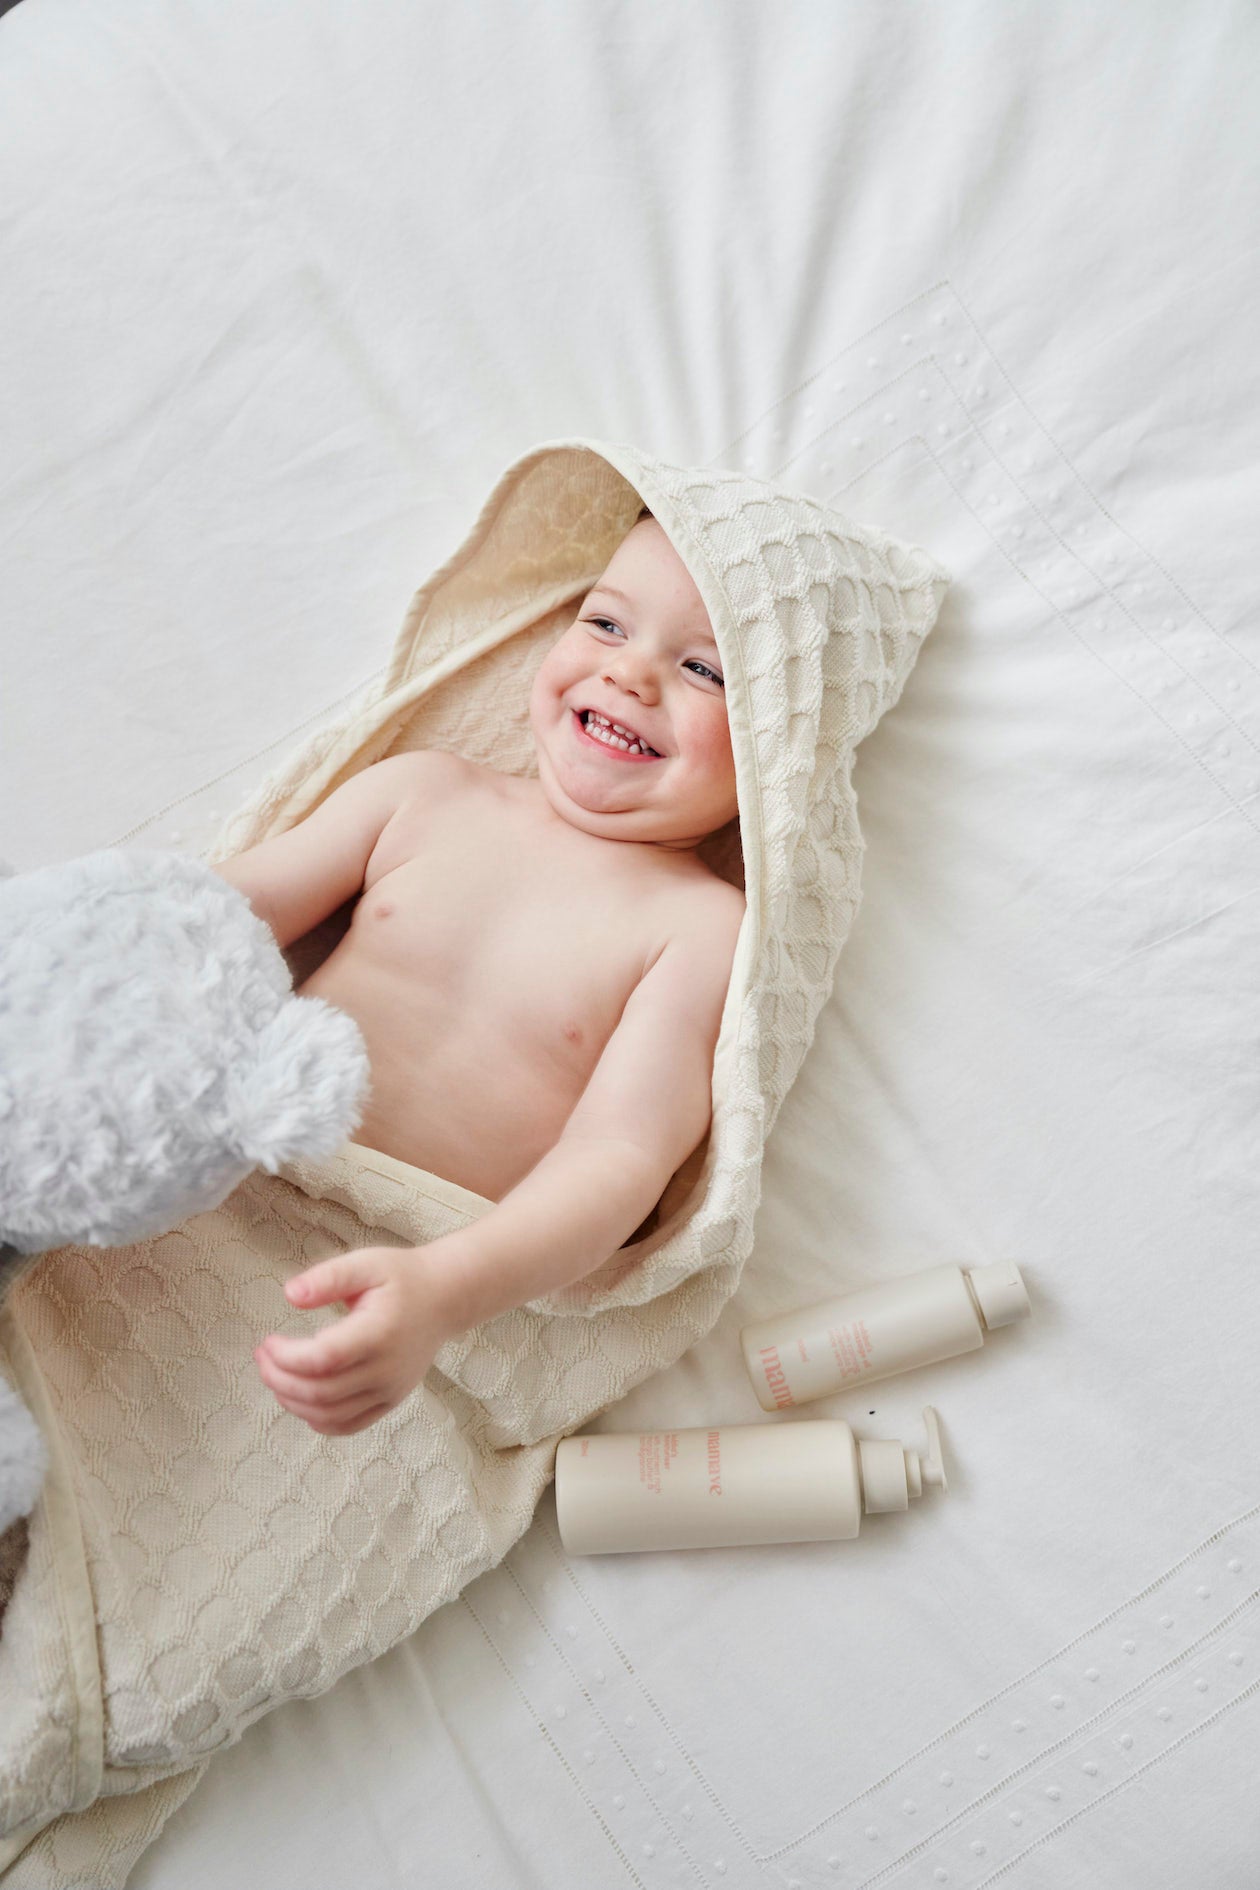 baby on bed with hooded towel on giggling with products beside and a blue teddy